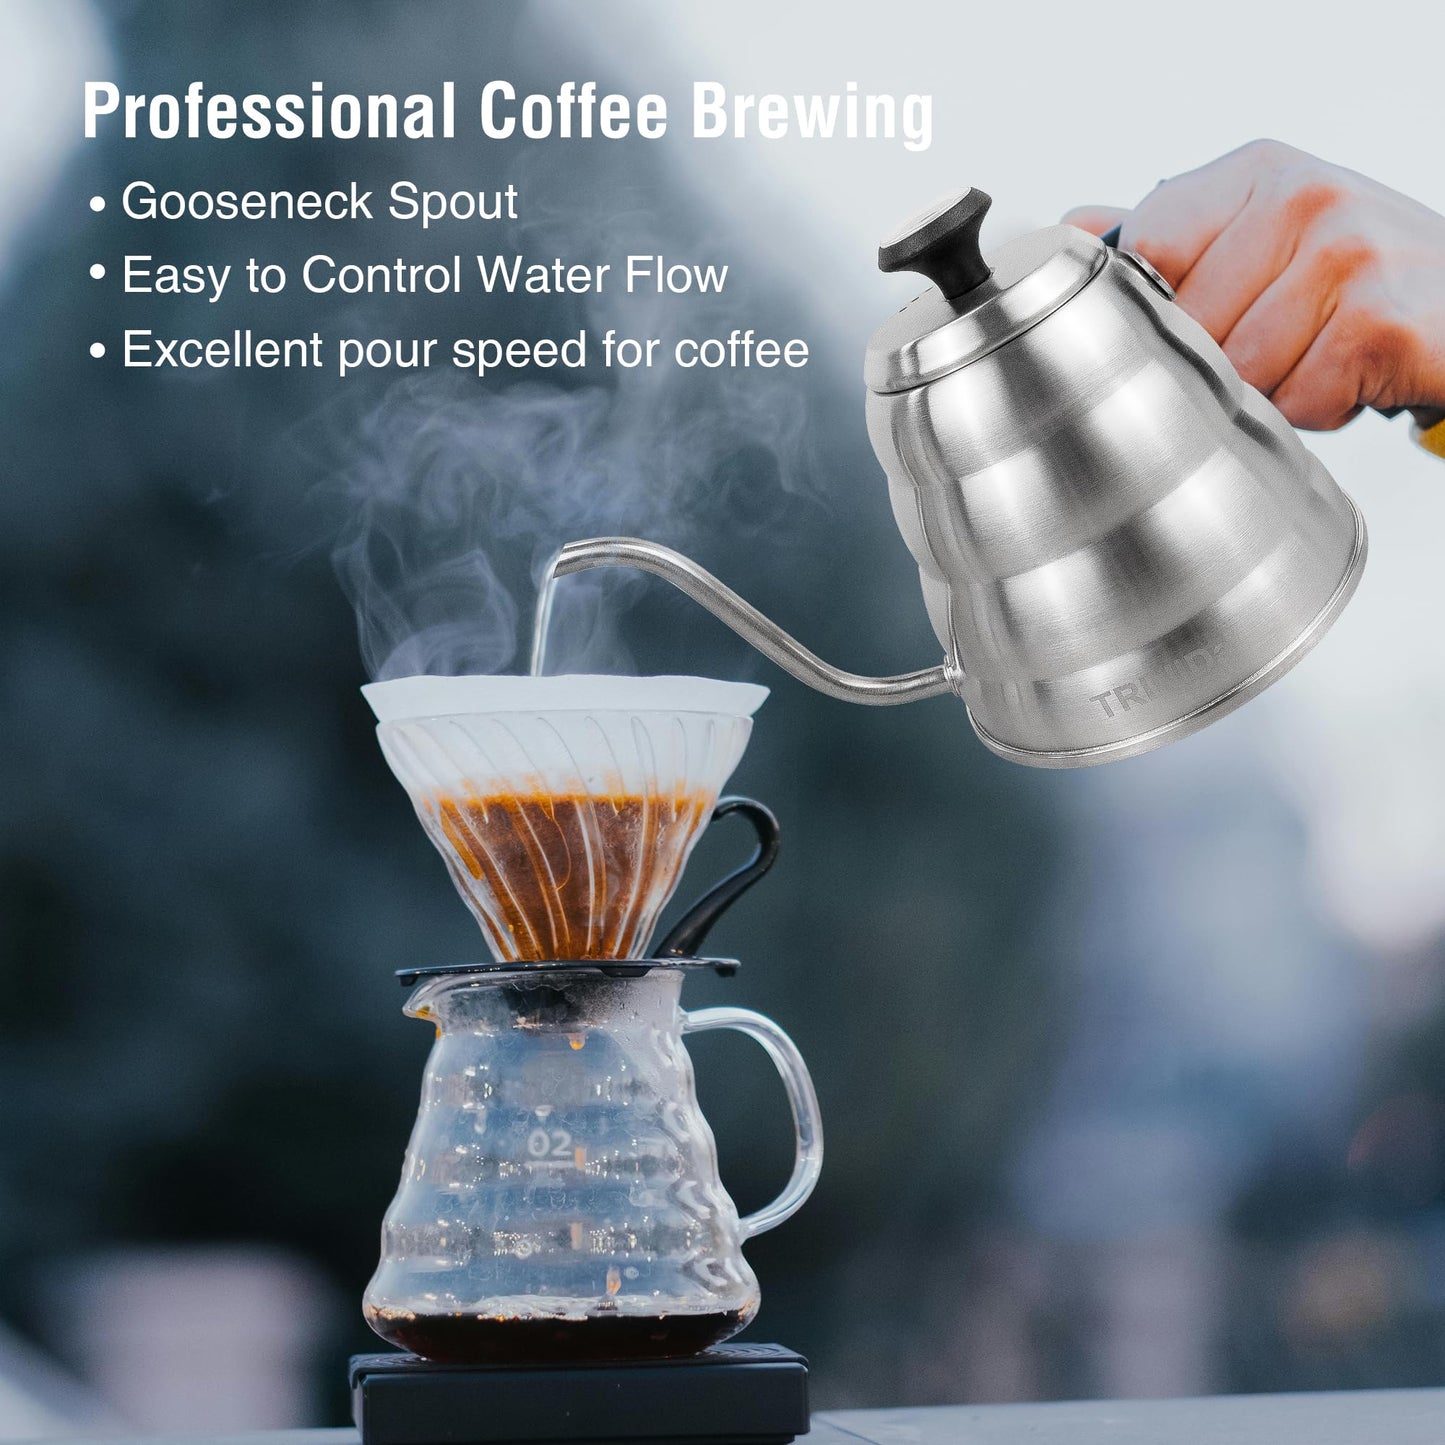 TRINIDa Gooseneck Kettle for Pour Over Coffee and Tea, 26 fl oz with Thermometer for Exact Temperature, Precision Pour Drip Spout, Stainless Steel, Compatible with all Stove Tops